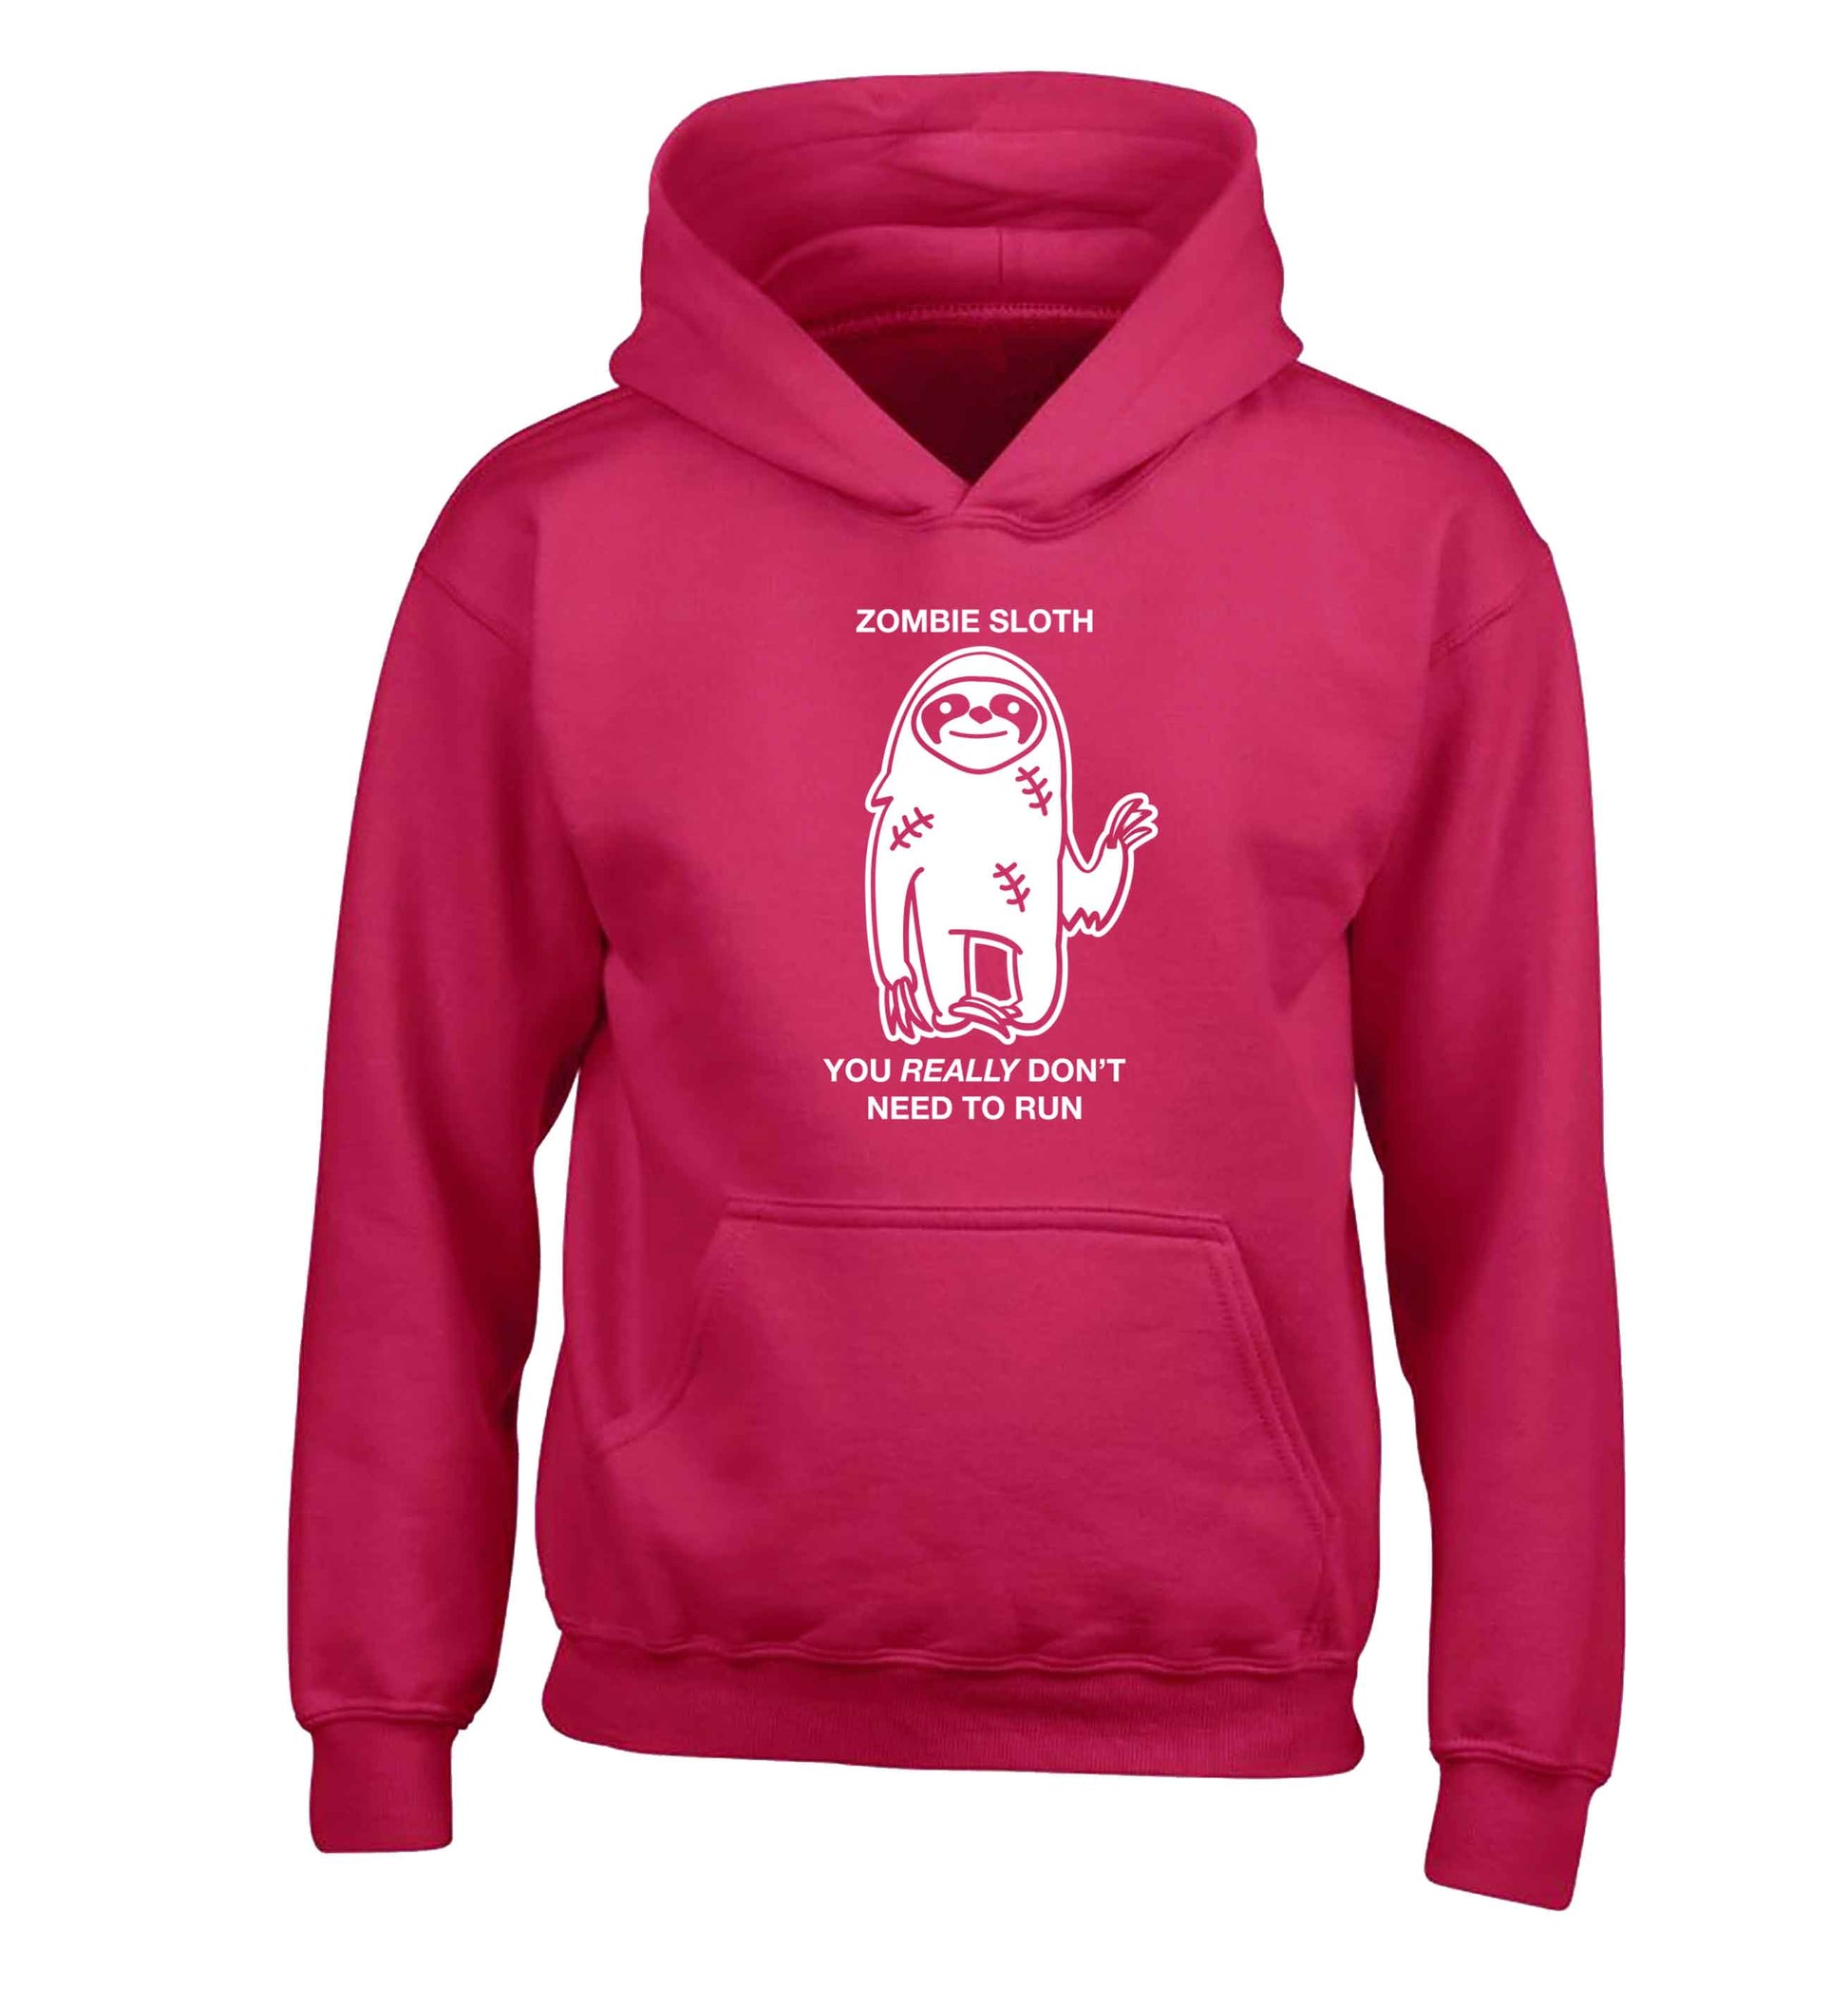 Zombie sloth you really don't need to run children's pink hoodie 12-13 Years